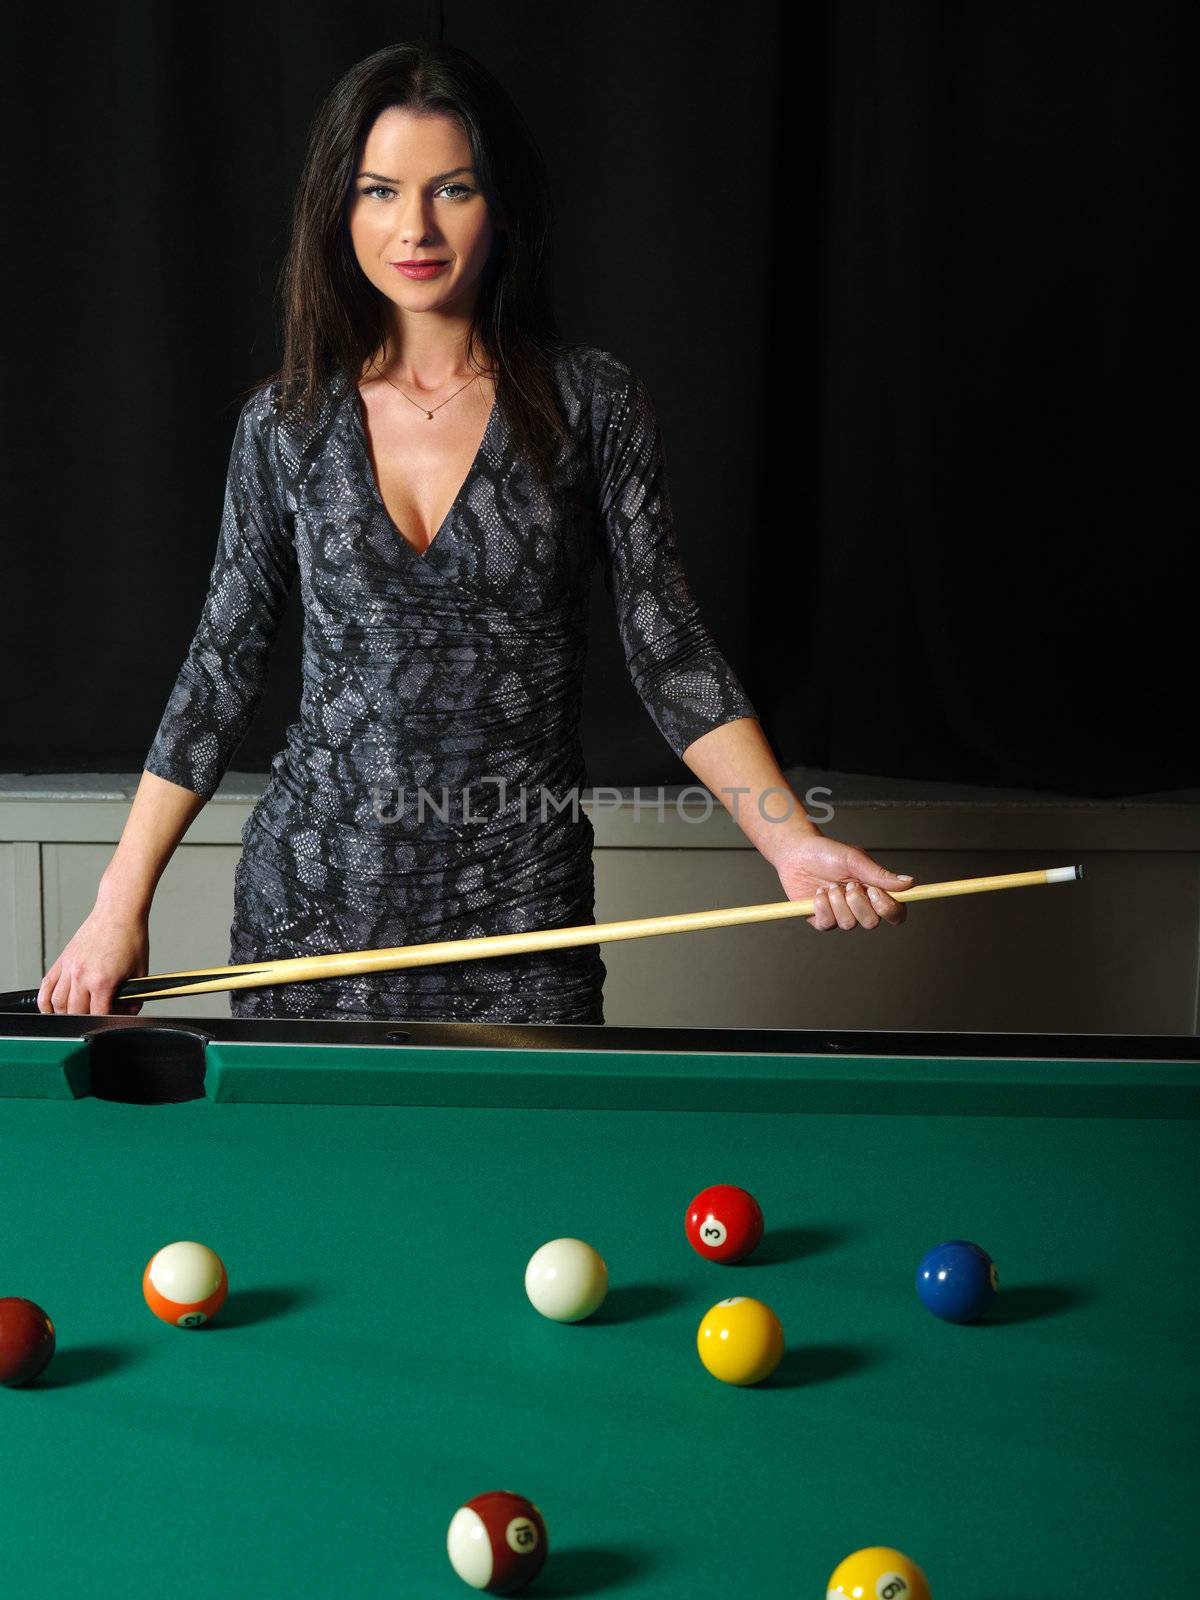 Photo of a beautiful brunette holding a pool cue and playing pool.
